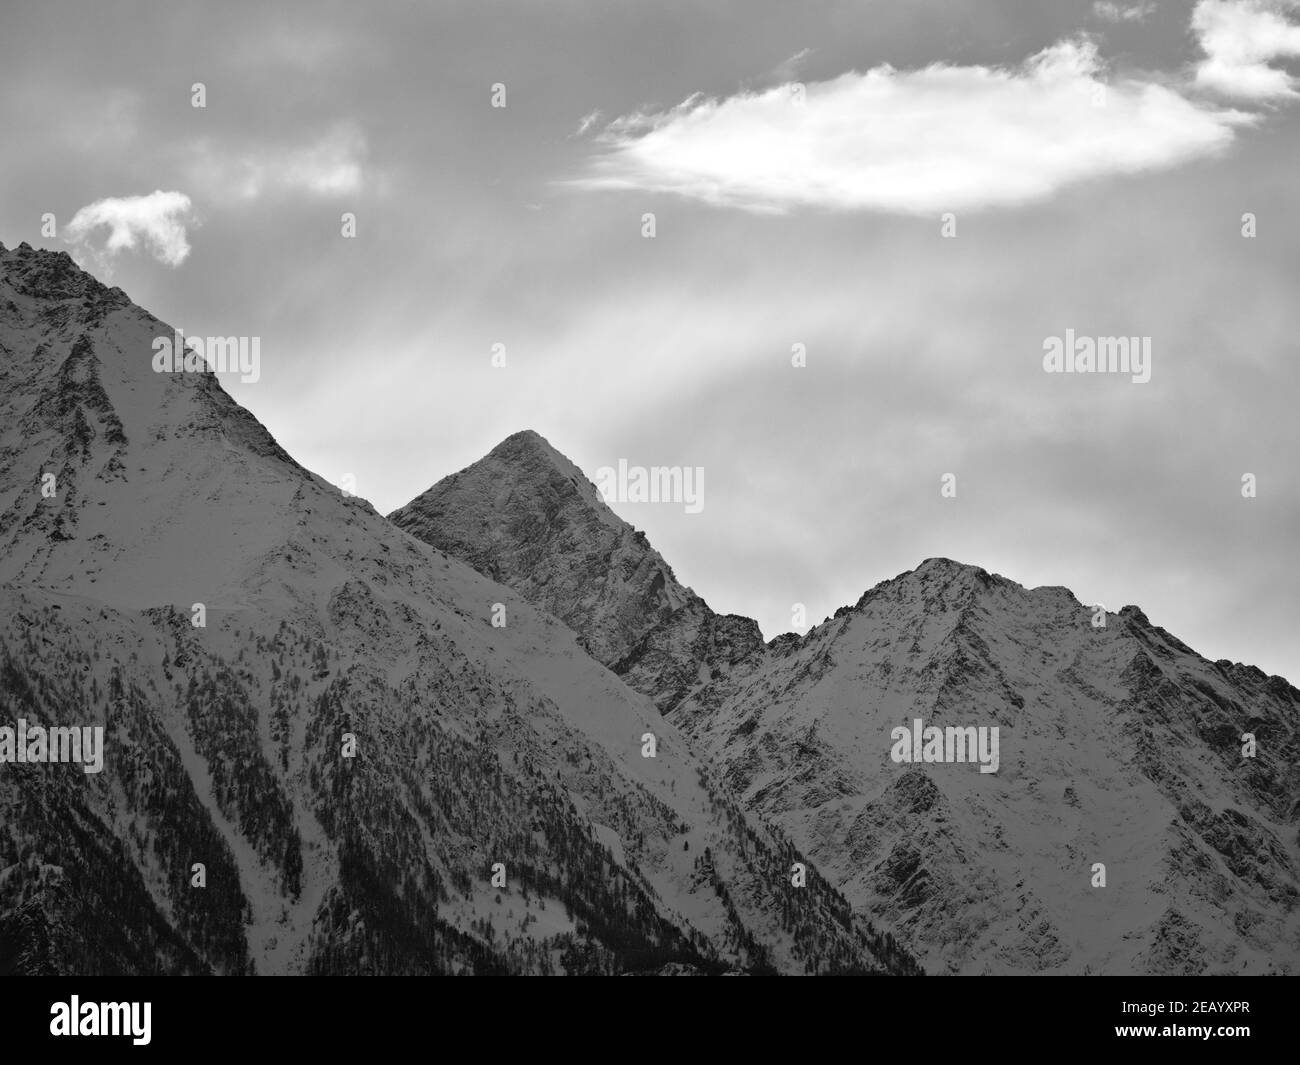 Verrayes, Aosta Valley (Italy): view on the amazing East face of Mont Emilius, seen from Verrayes. Stock Photo